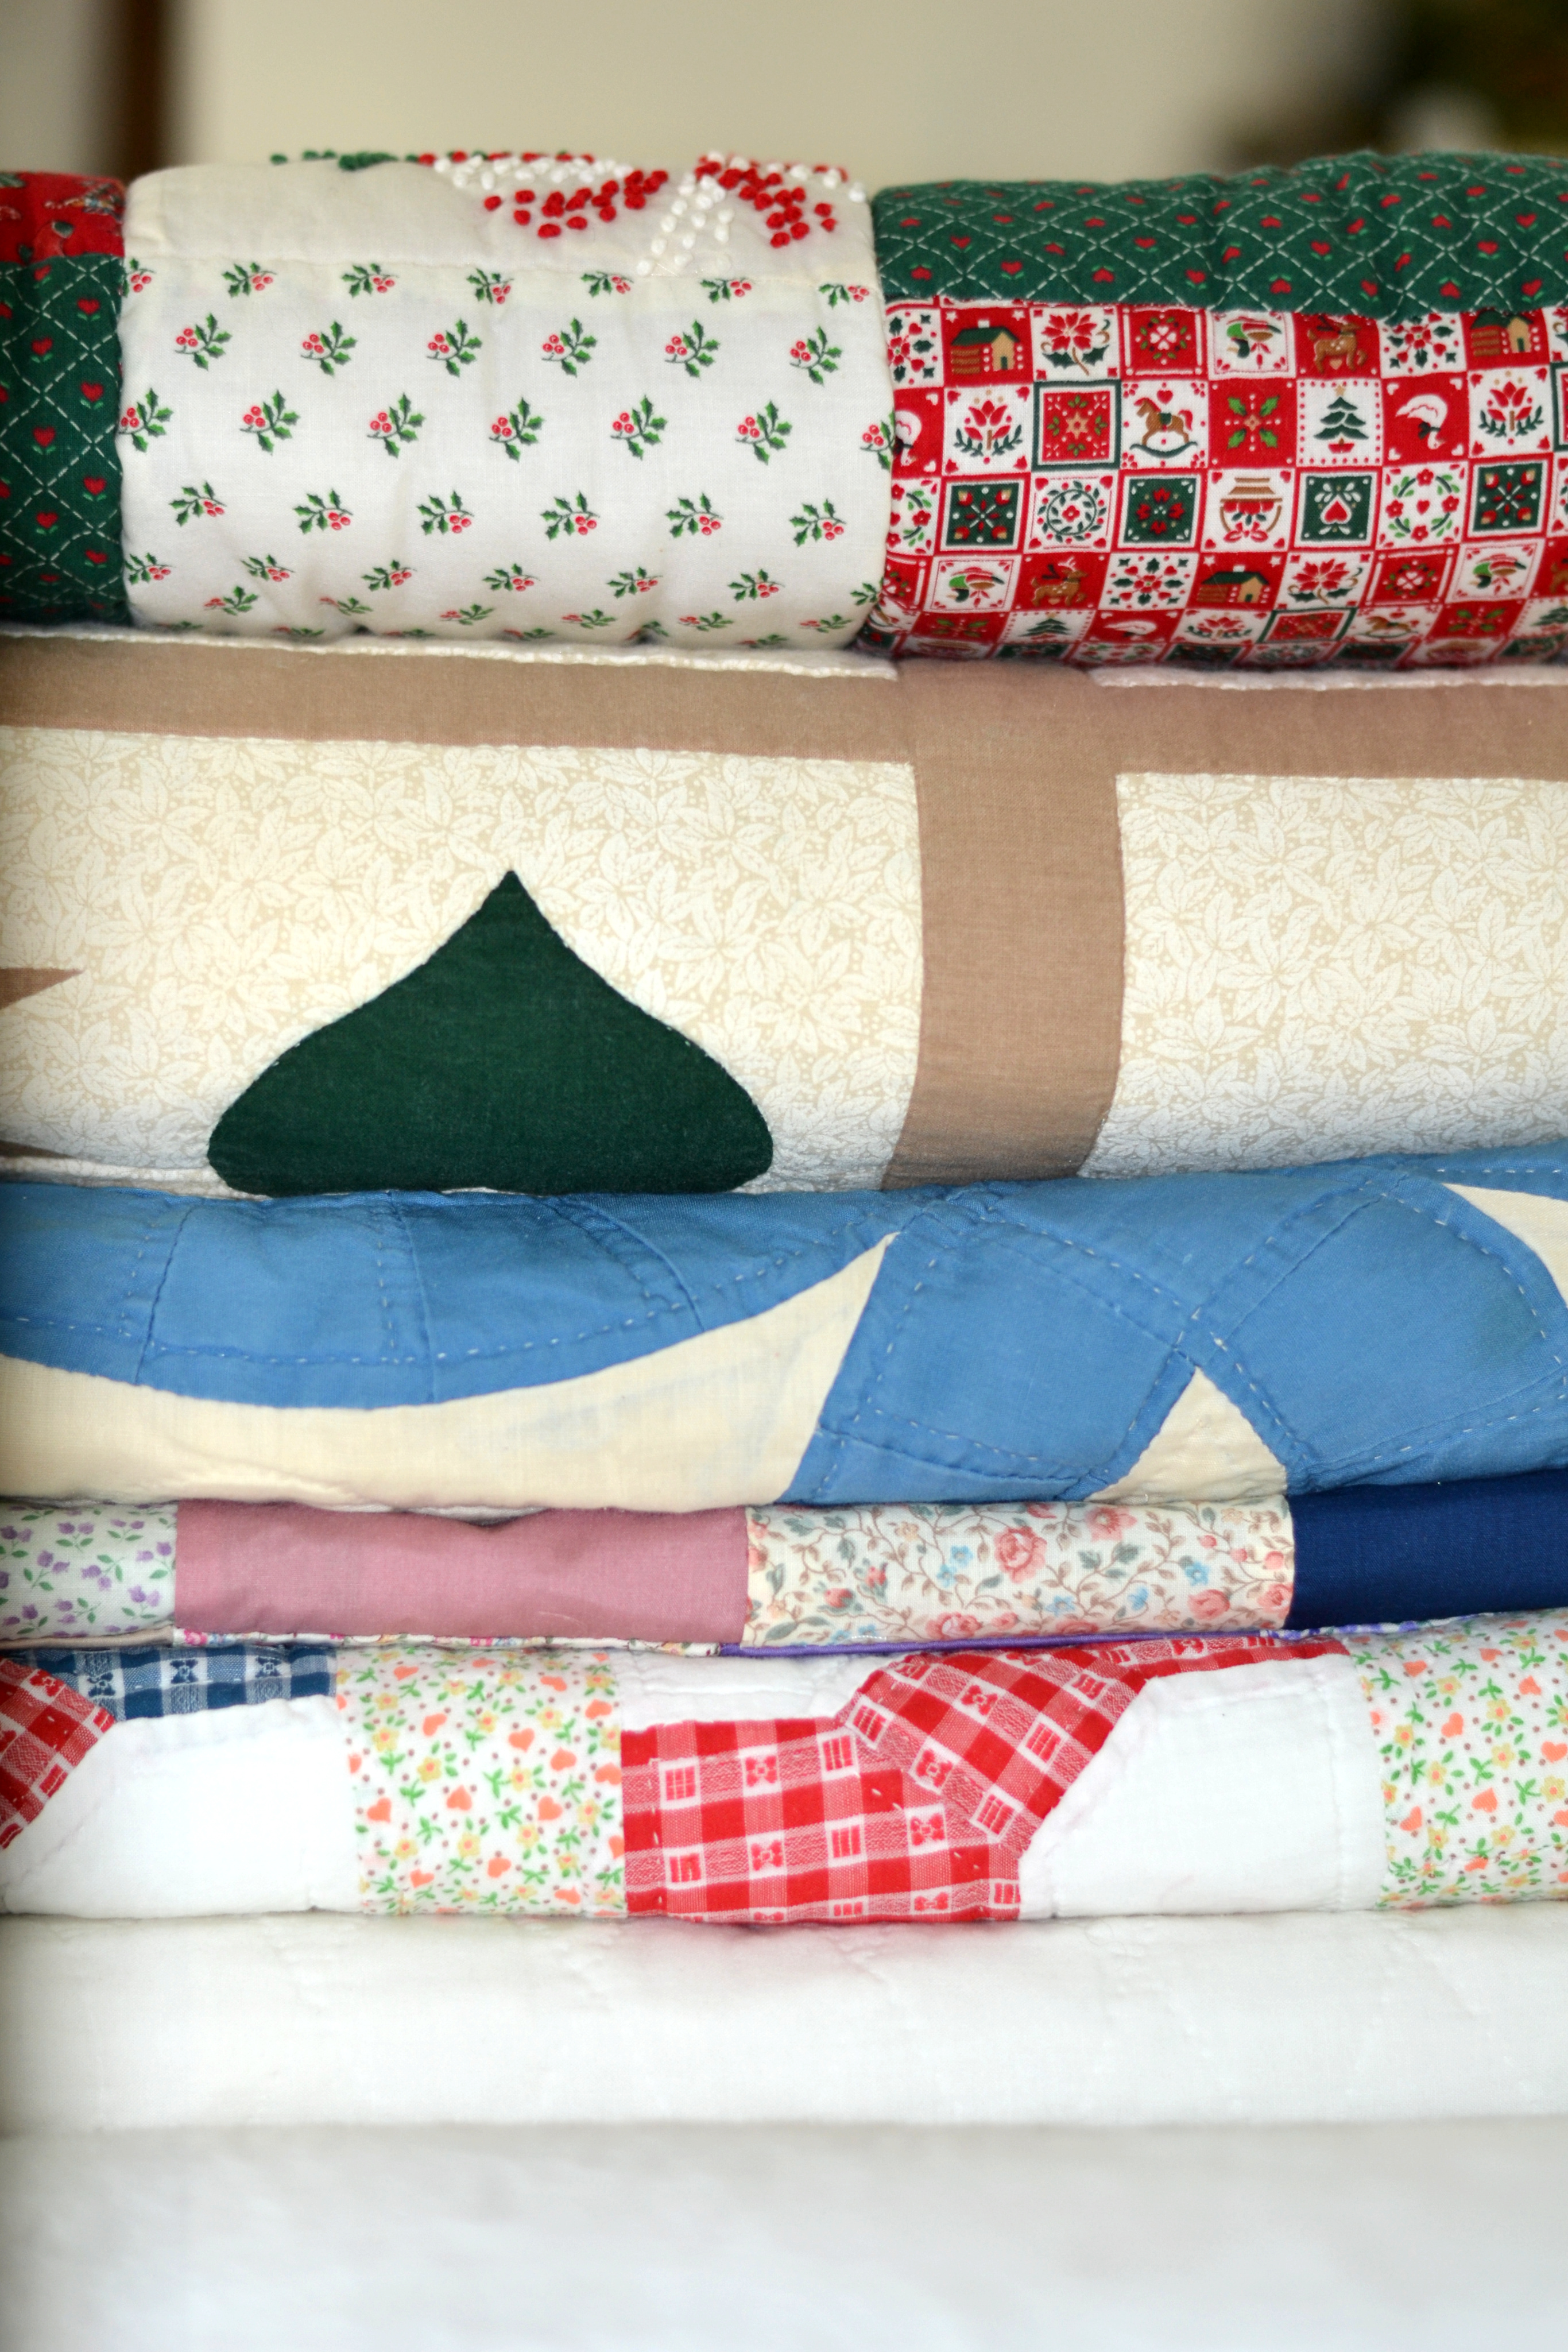 How to maintain and store vintage linens and quilts